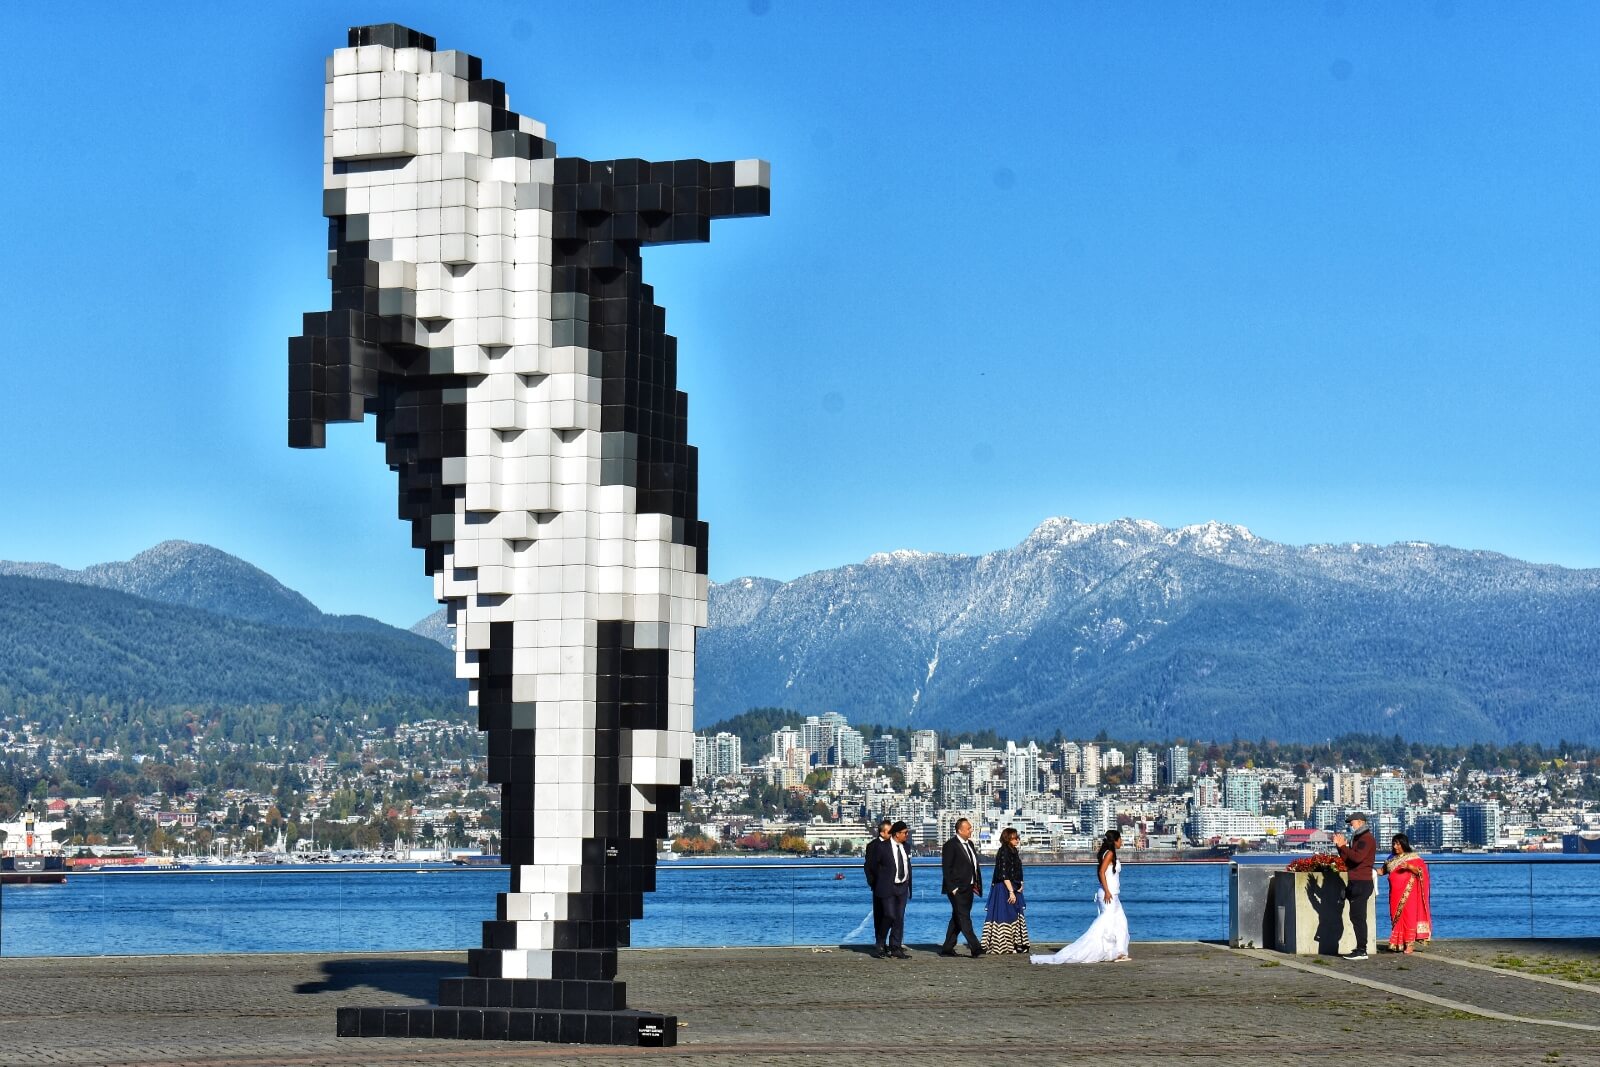 douglas coupland's digital orca with snowy mountain background in vancouver